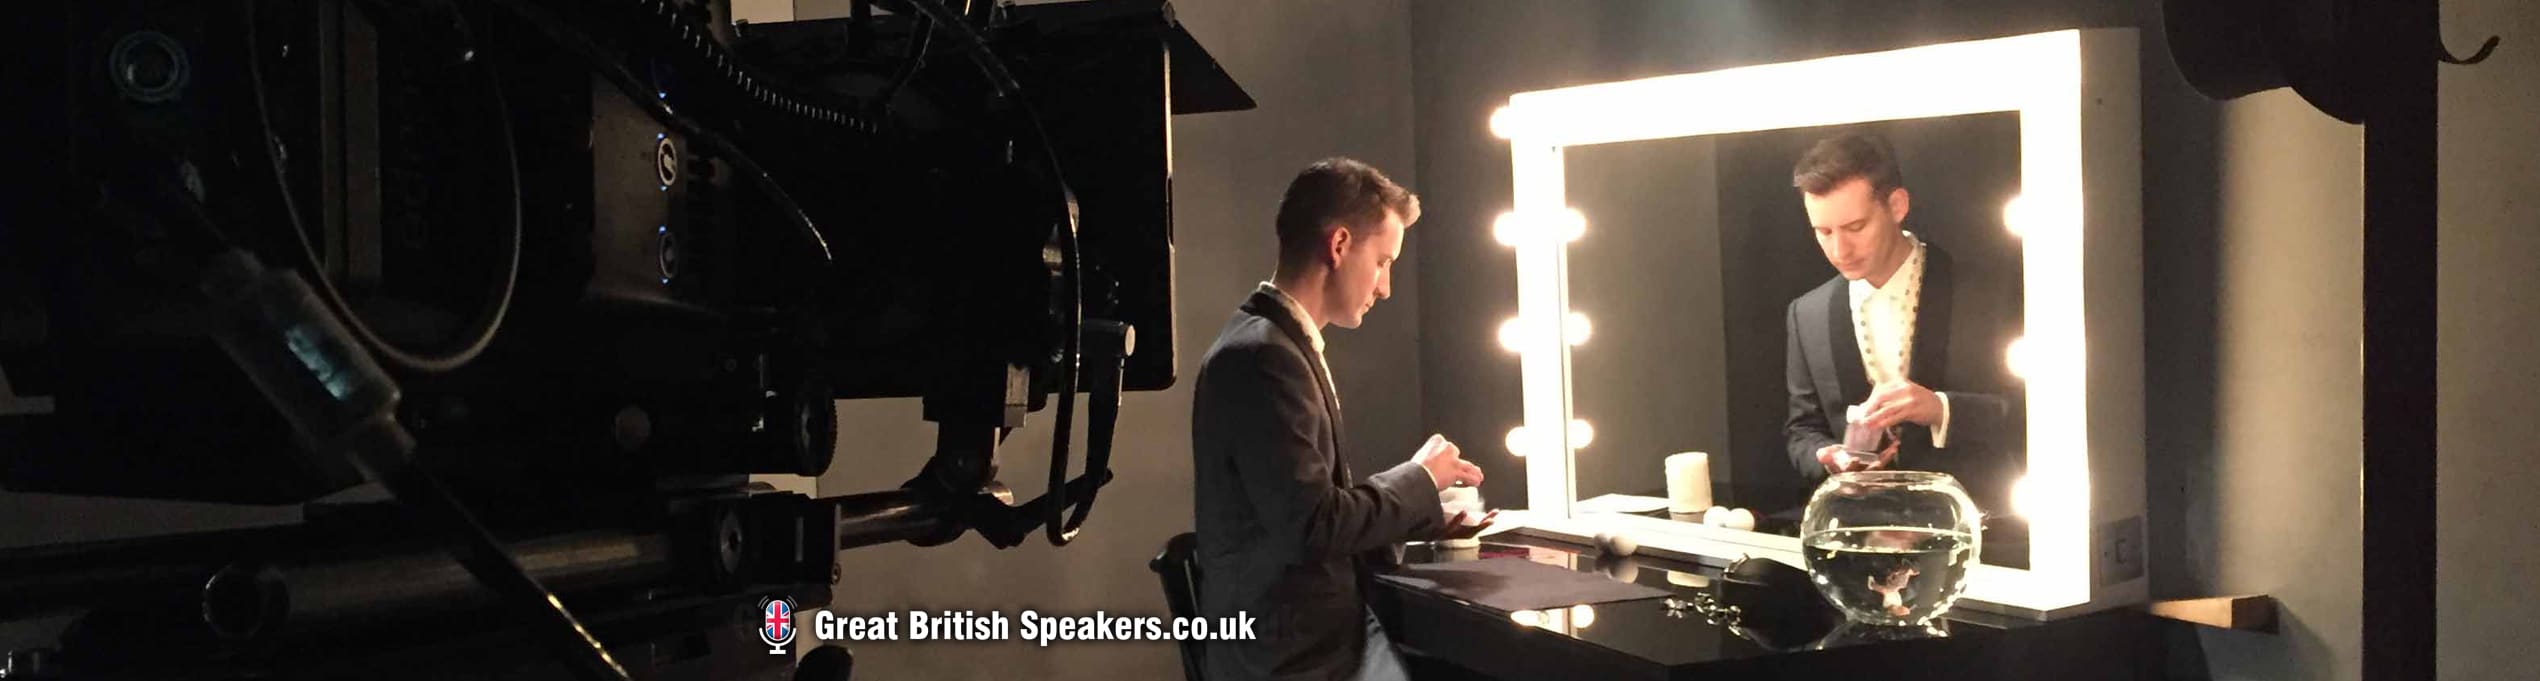 MANAGE CORONOVIROUS UNCERTAINTY AND CHANGE WITH CREATIVITY with Christopher Howell speaker coach at Great British Speakers